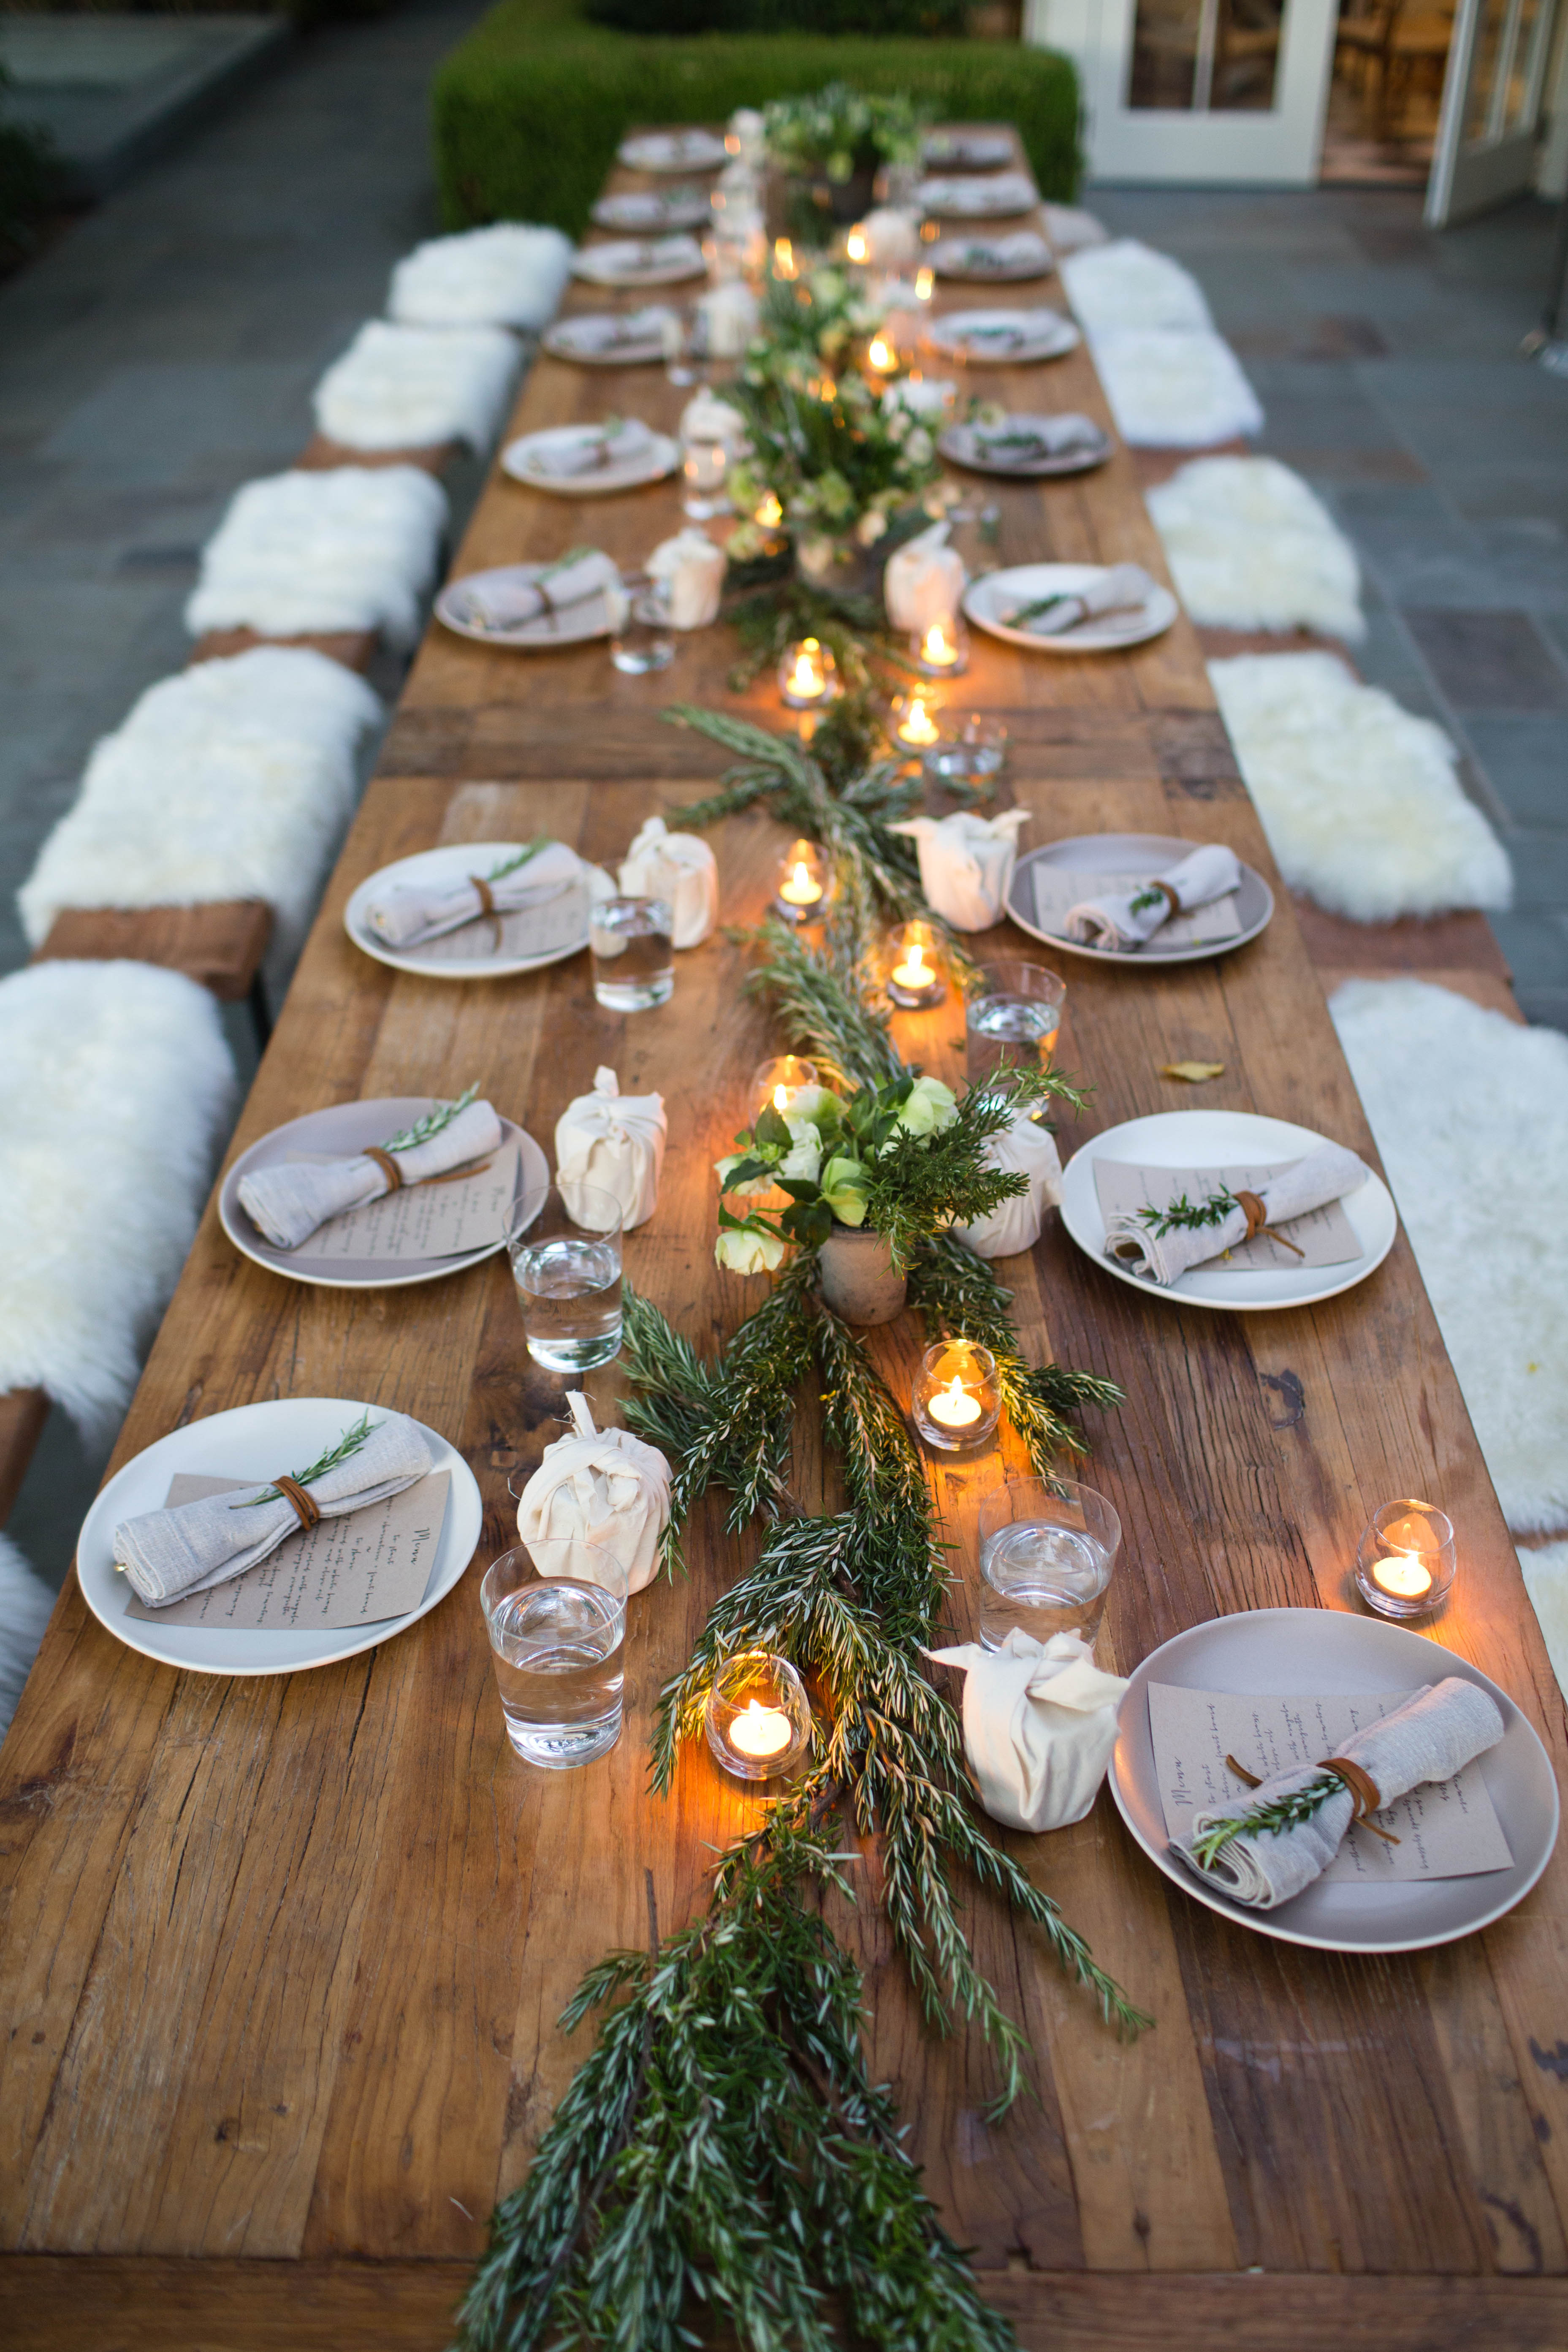 Table decorated with herbs | Image by Brittany Wood